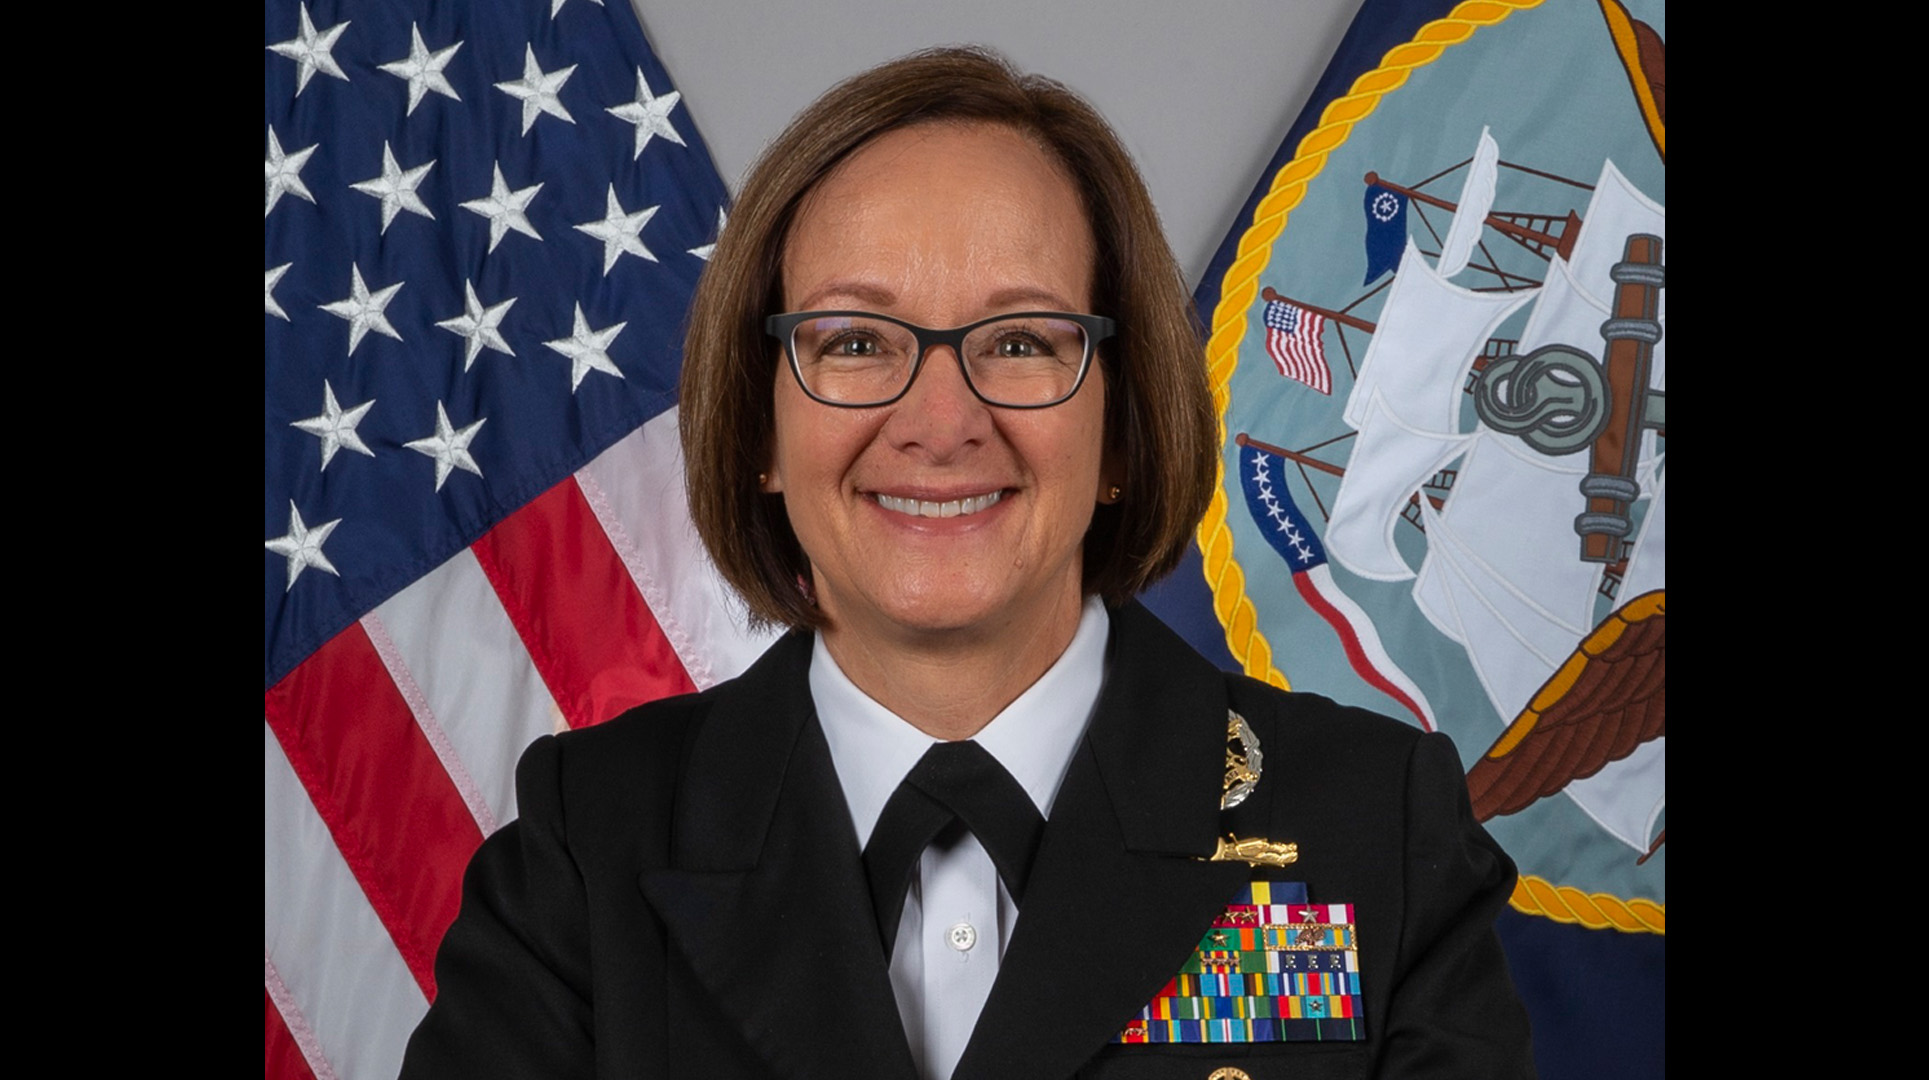 Biden names Adm. Lisa Franchetti as Chief of Naval Operations, first woman to Joint Chiefs